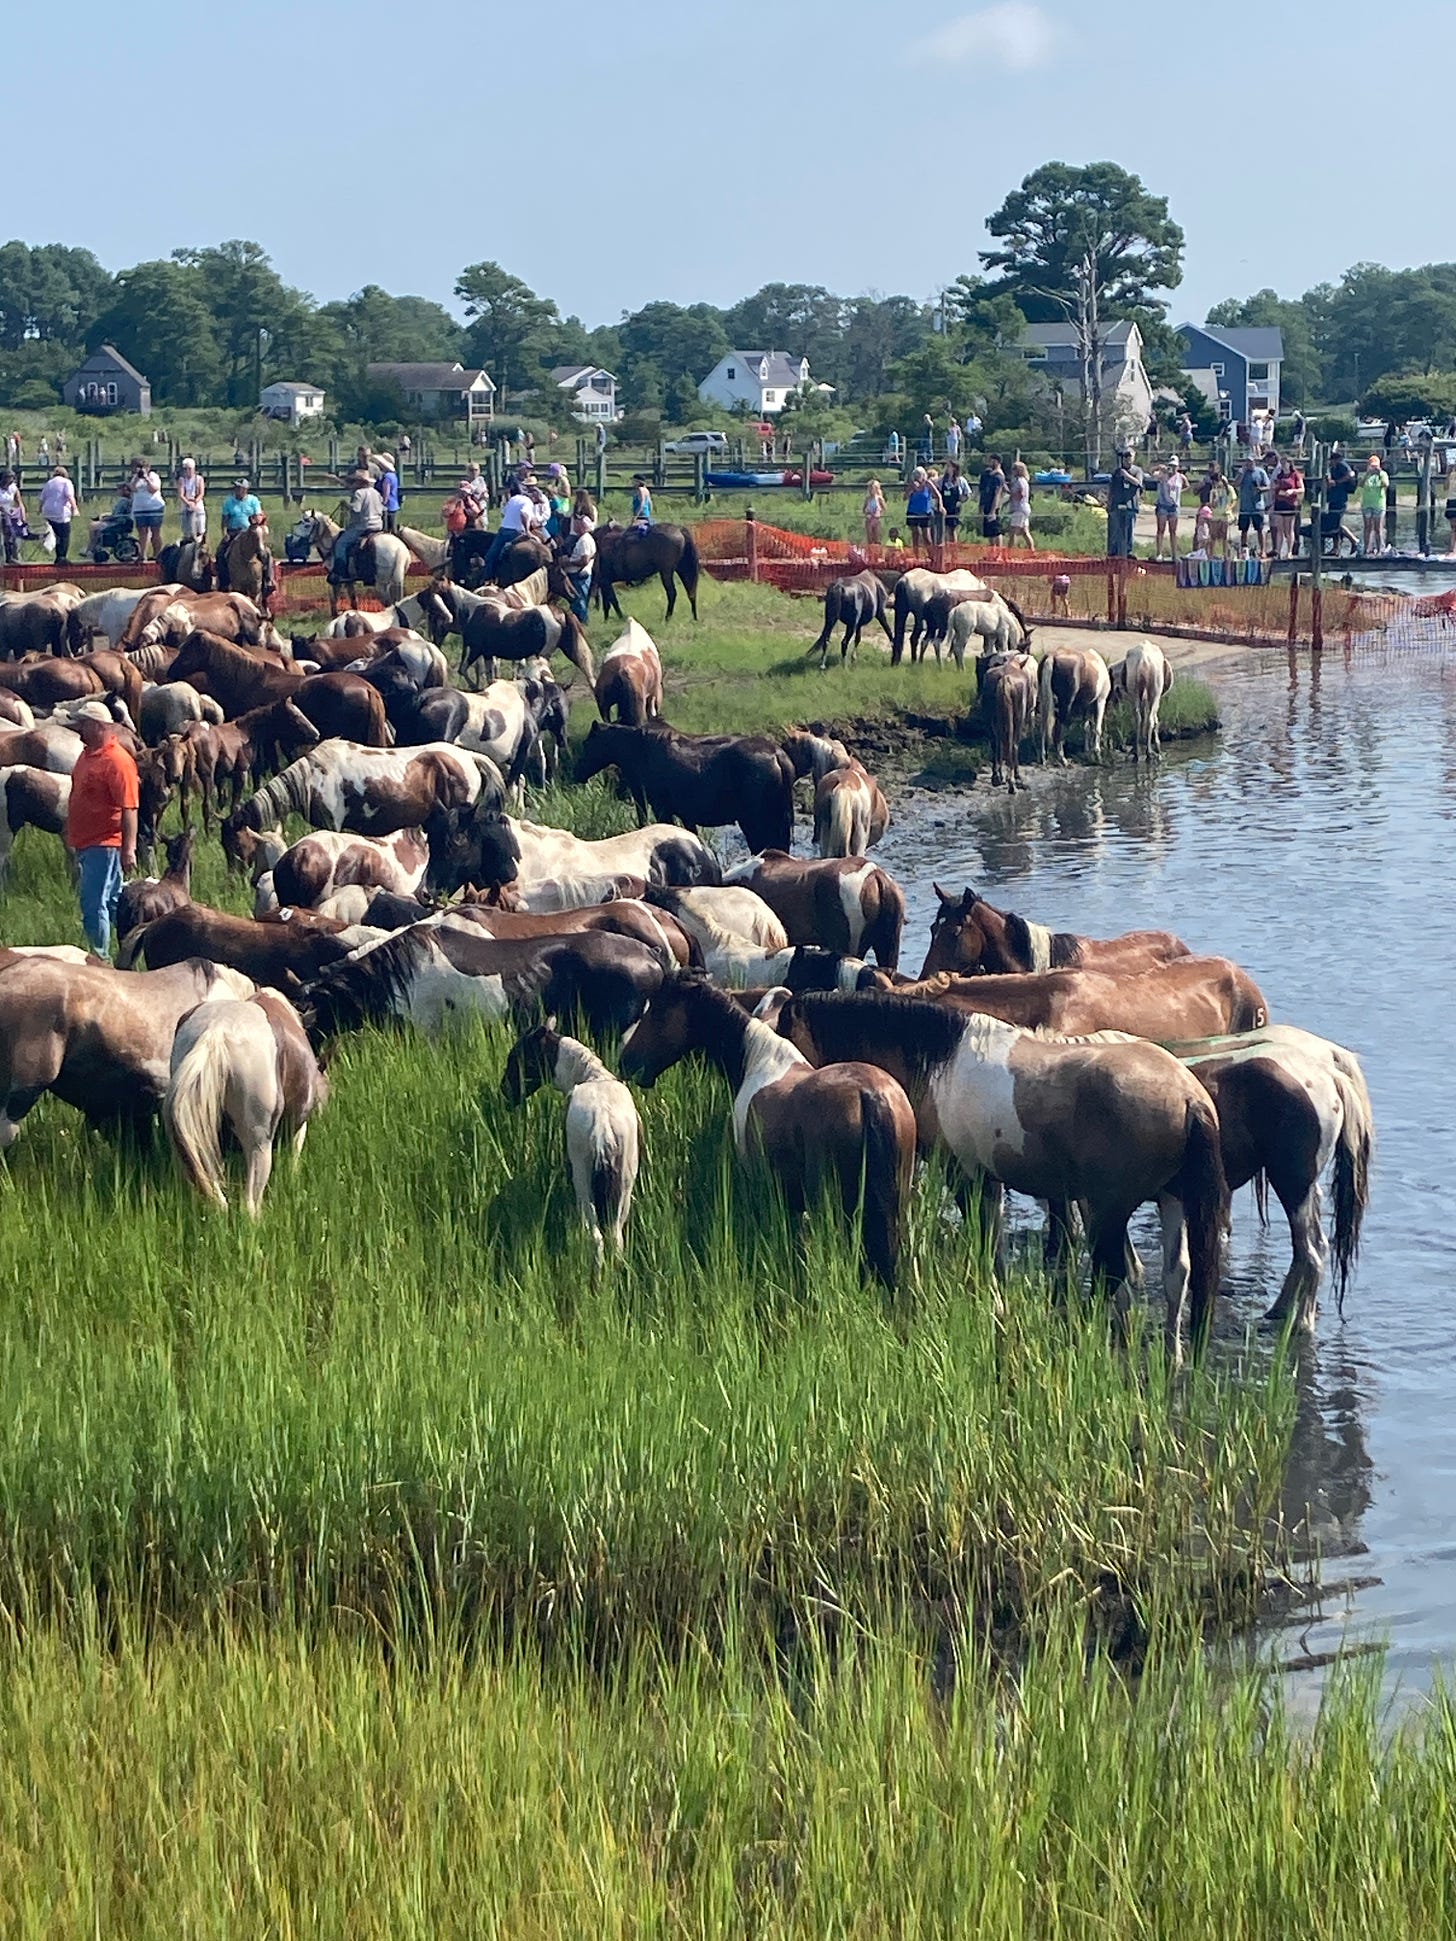 A herd of soaking wet horses in a marsh. The sky is blue, and the horses are surrounded by people. 